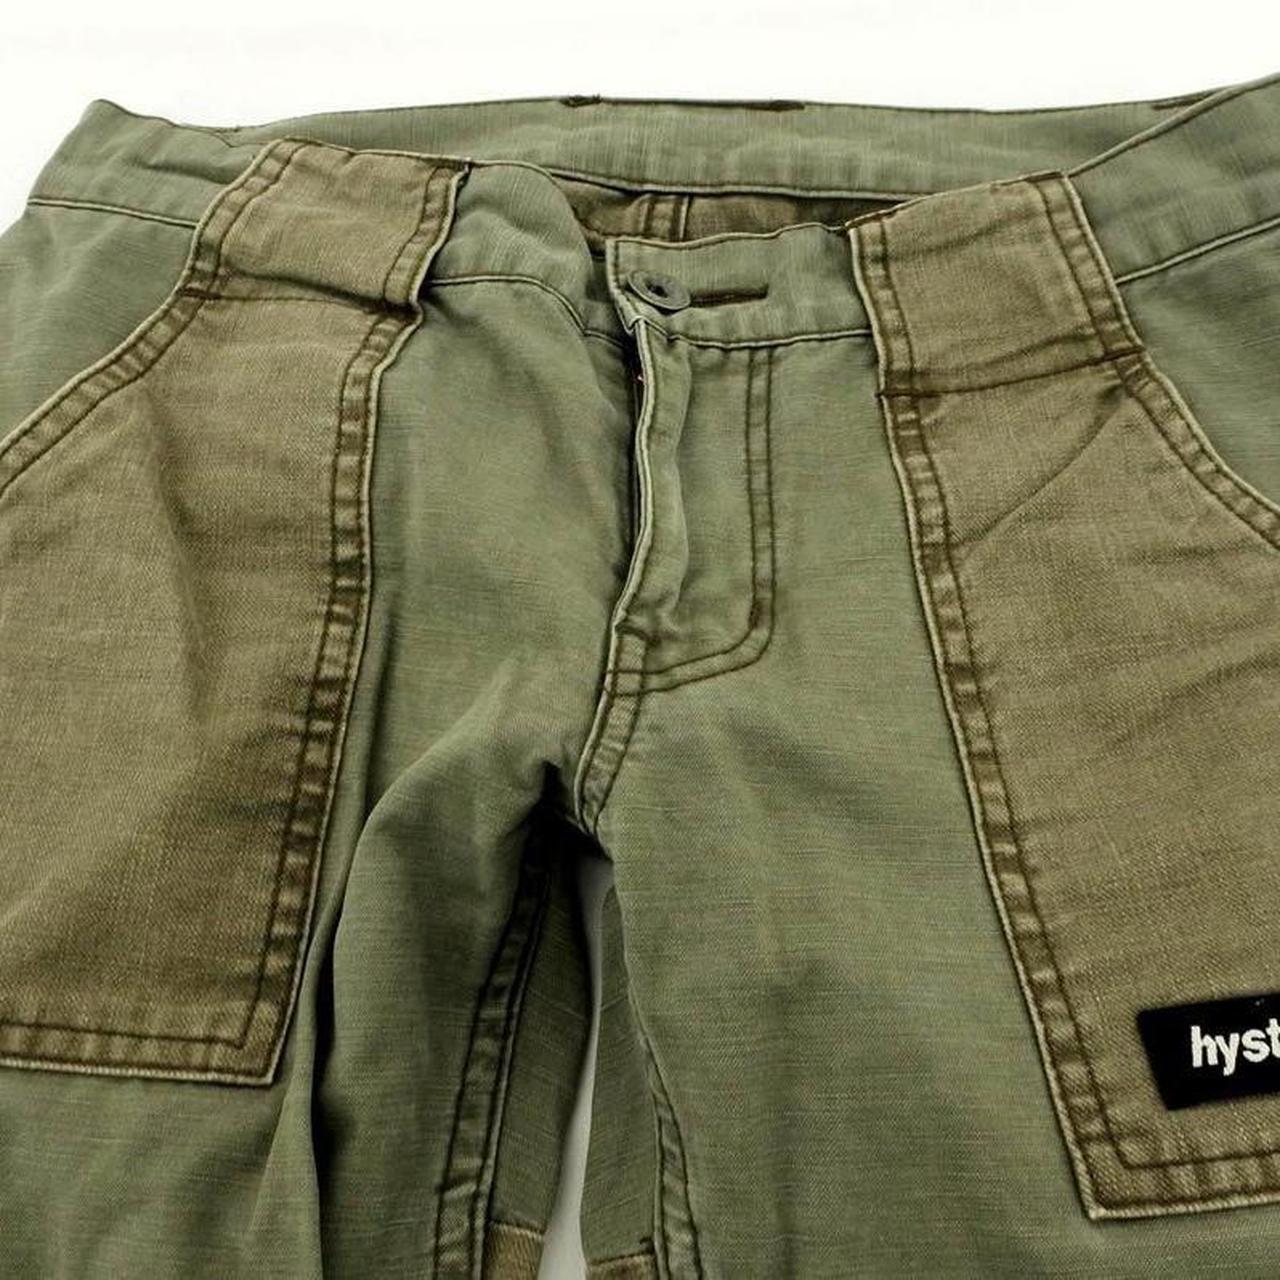 Hysteric Glamour Men's Khaki and Green Jeans (4)